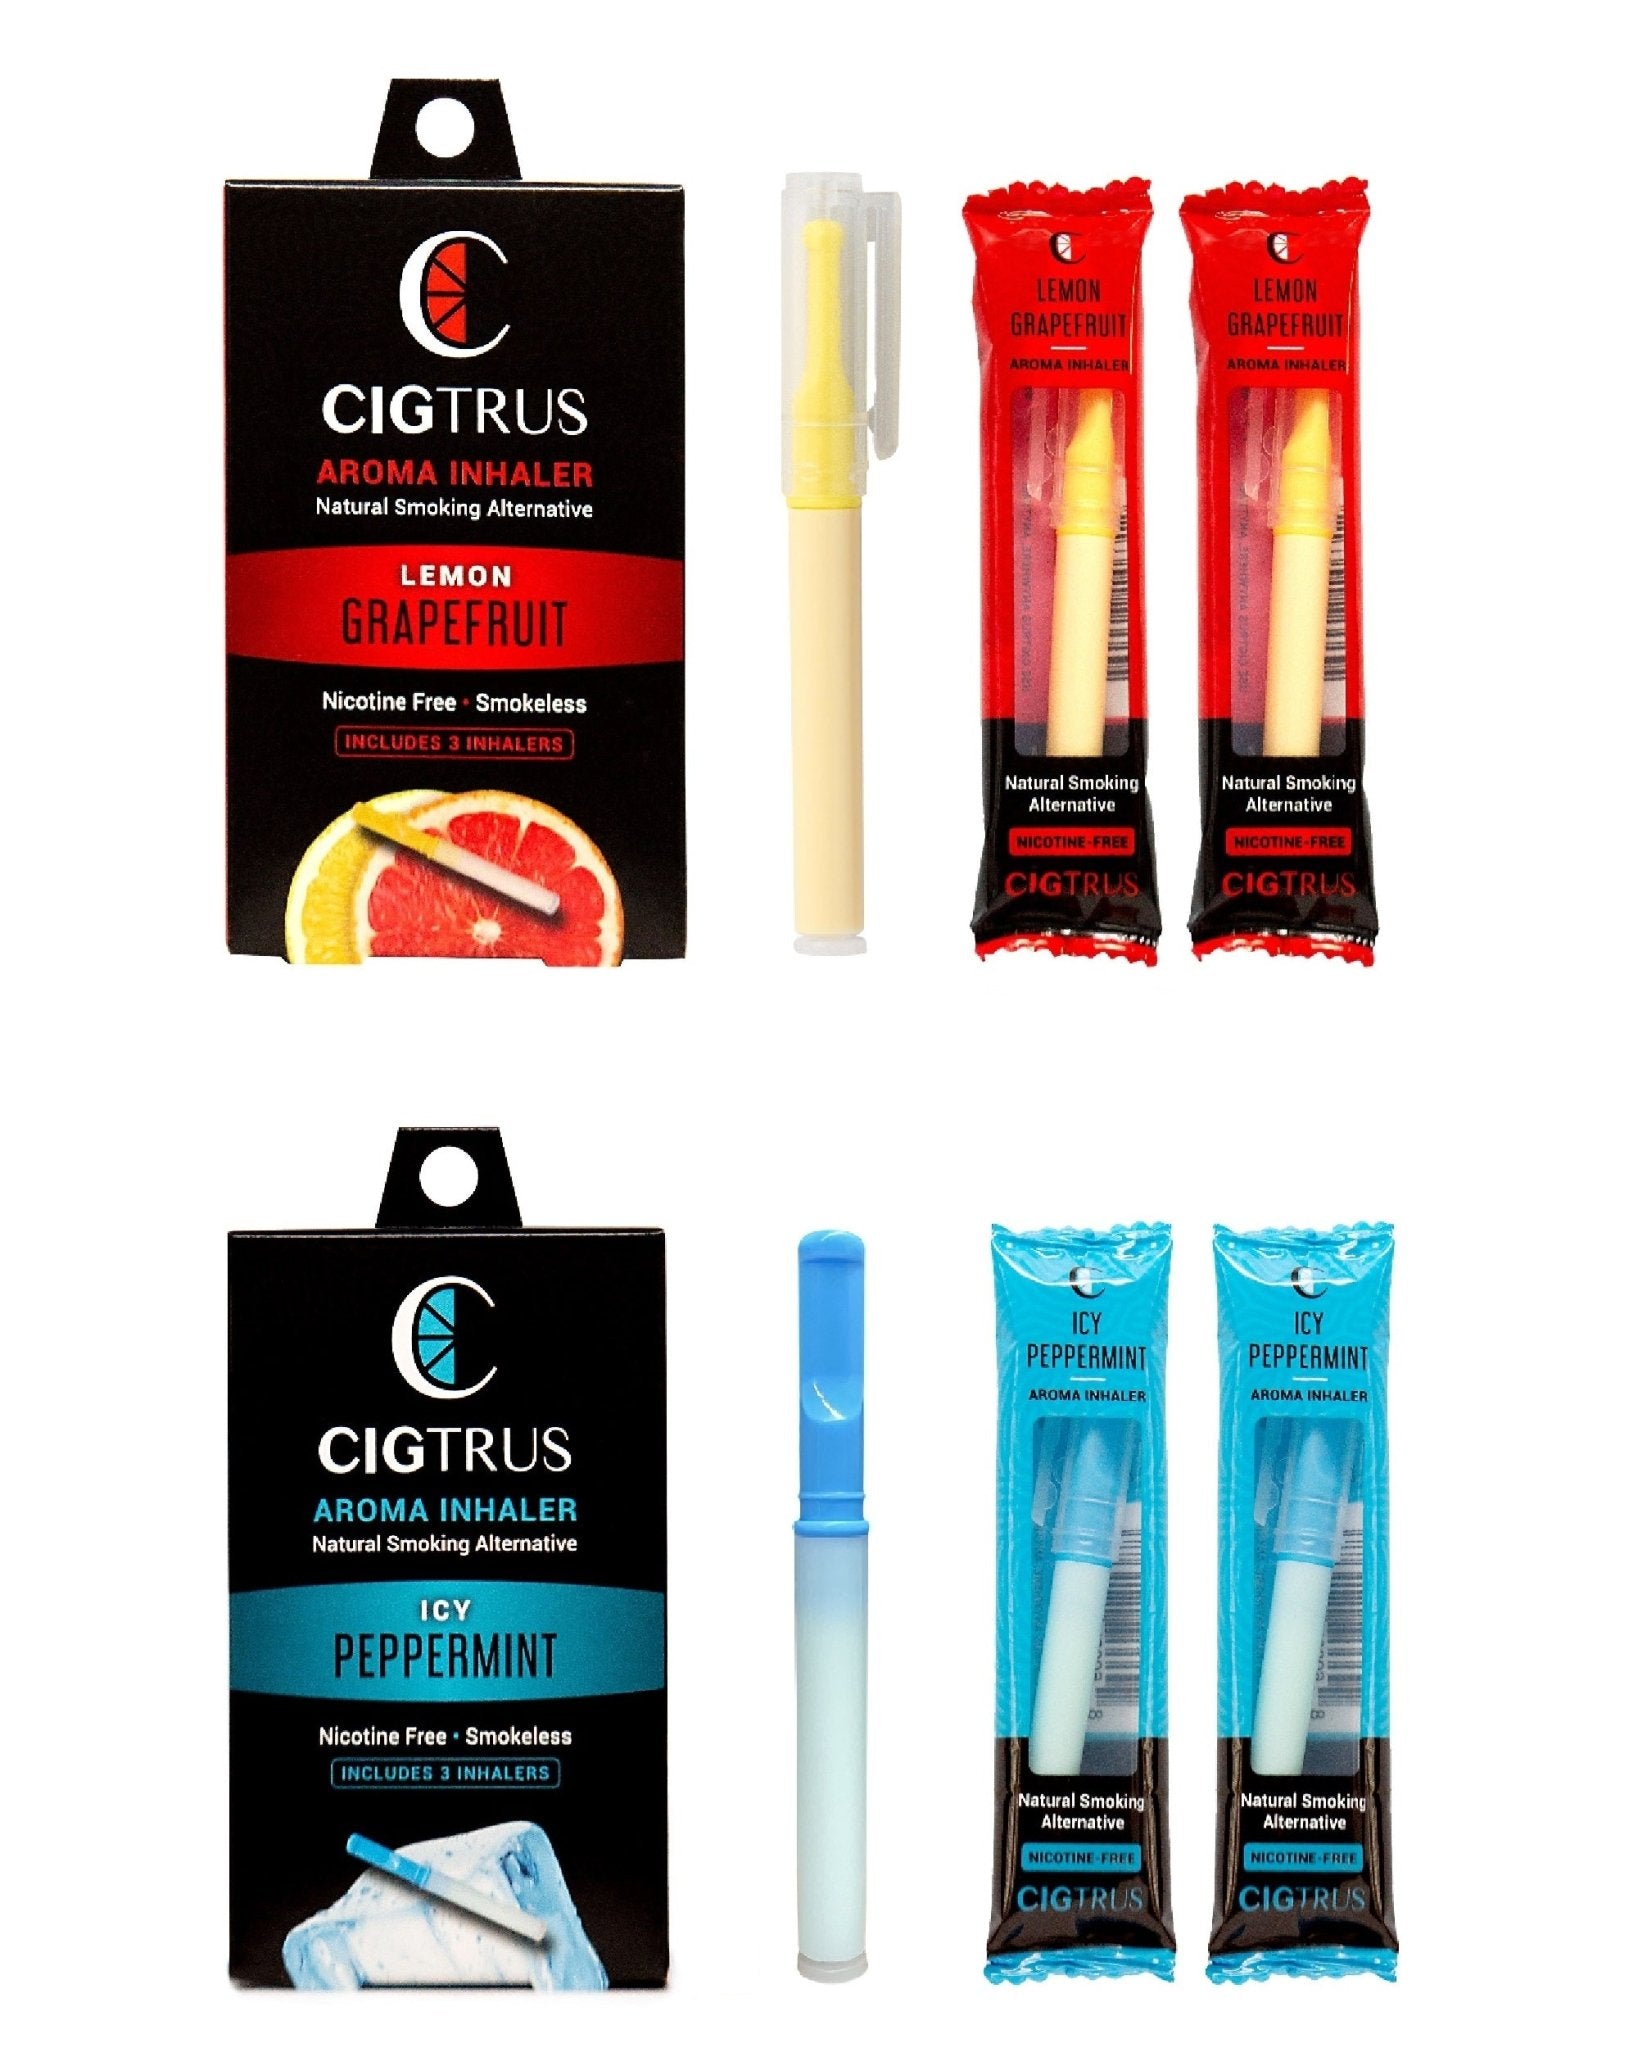 Cigtrus Quit Smoking Behavioral Support Nicotine-Free Oxygen Inhaler Natural Remedy - The Refreshing Collection 3 Pack Each Citrus Grapefruit & Icy Peppermint - cigtrus.comcigtrus.com